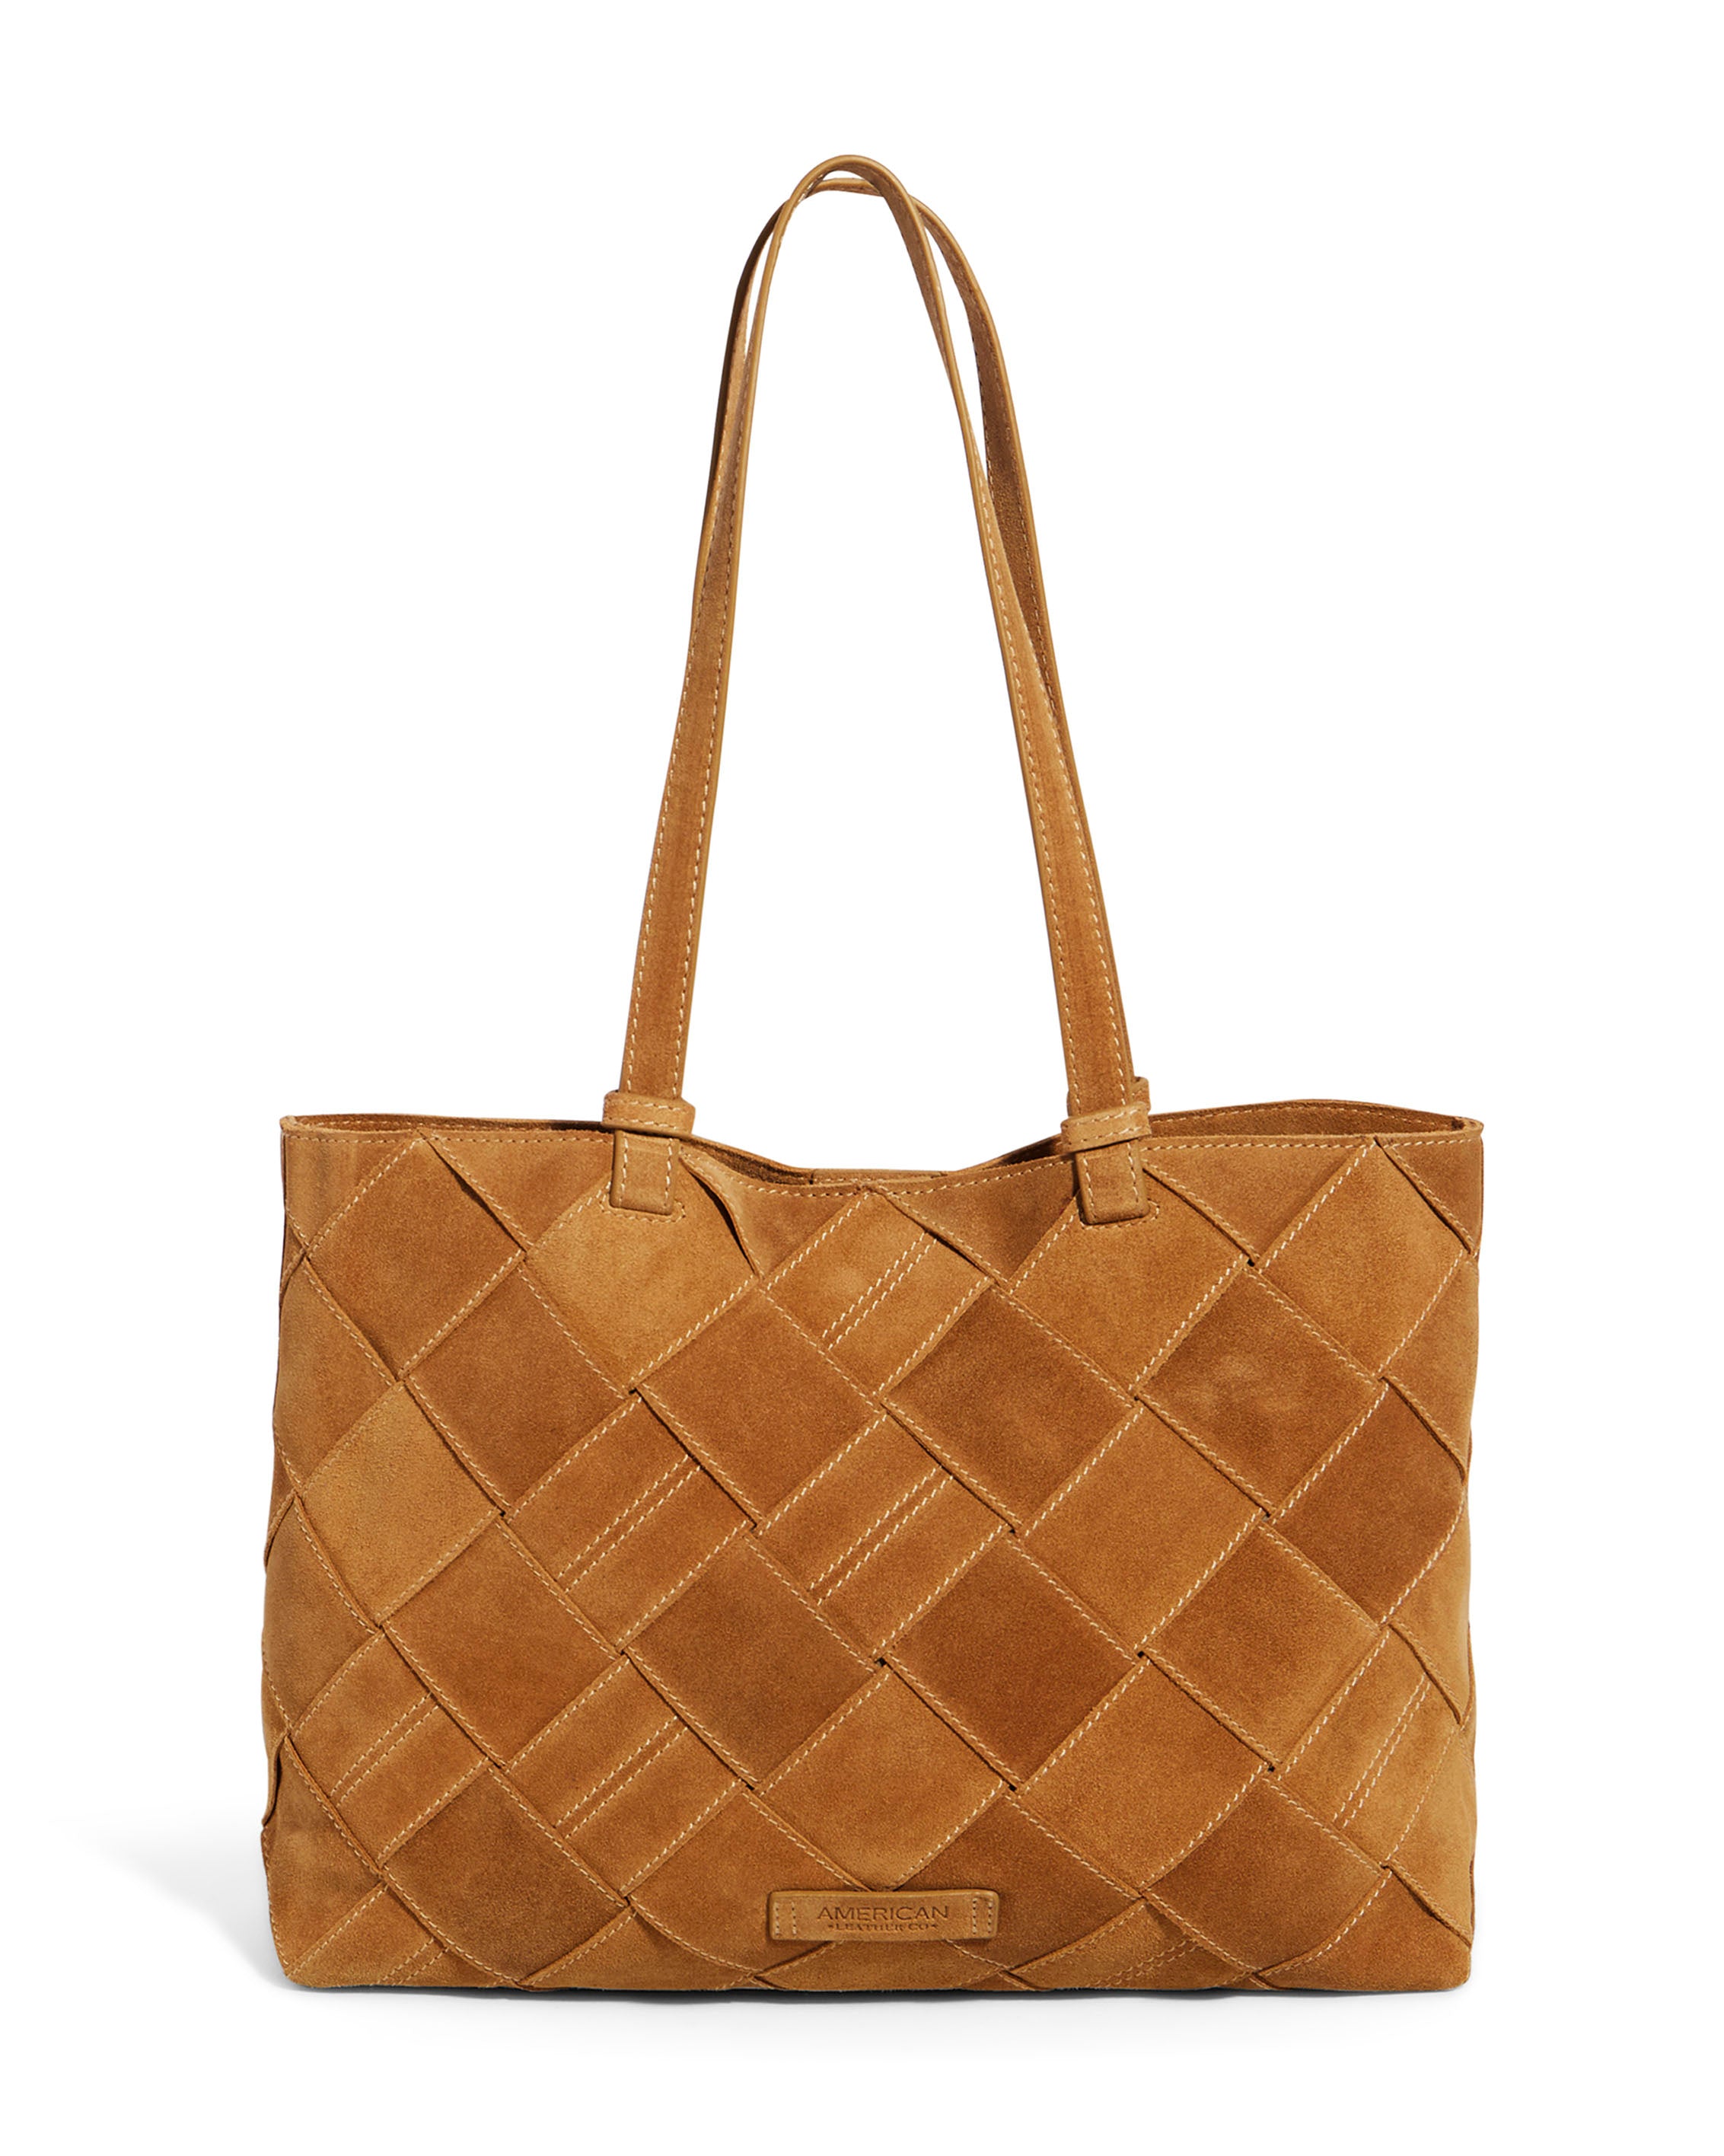 Chanel Patchwork Leather Tote